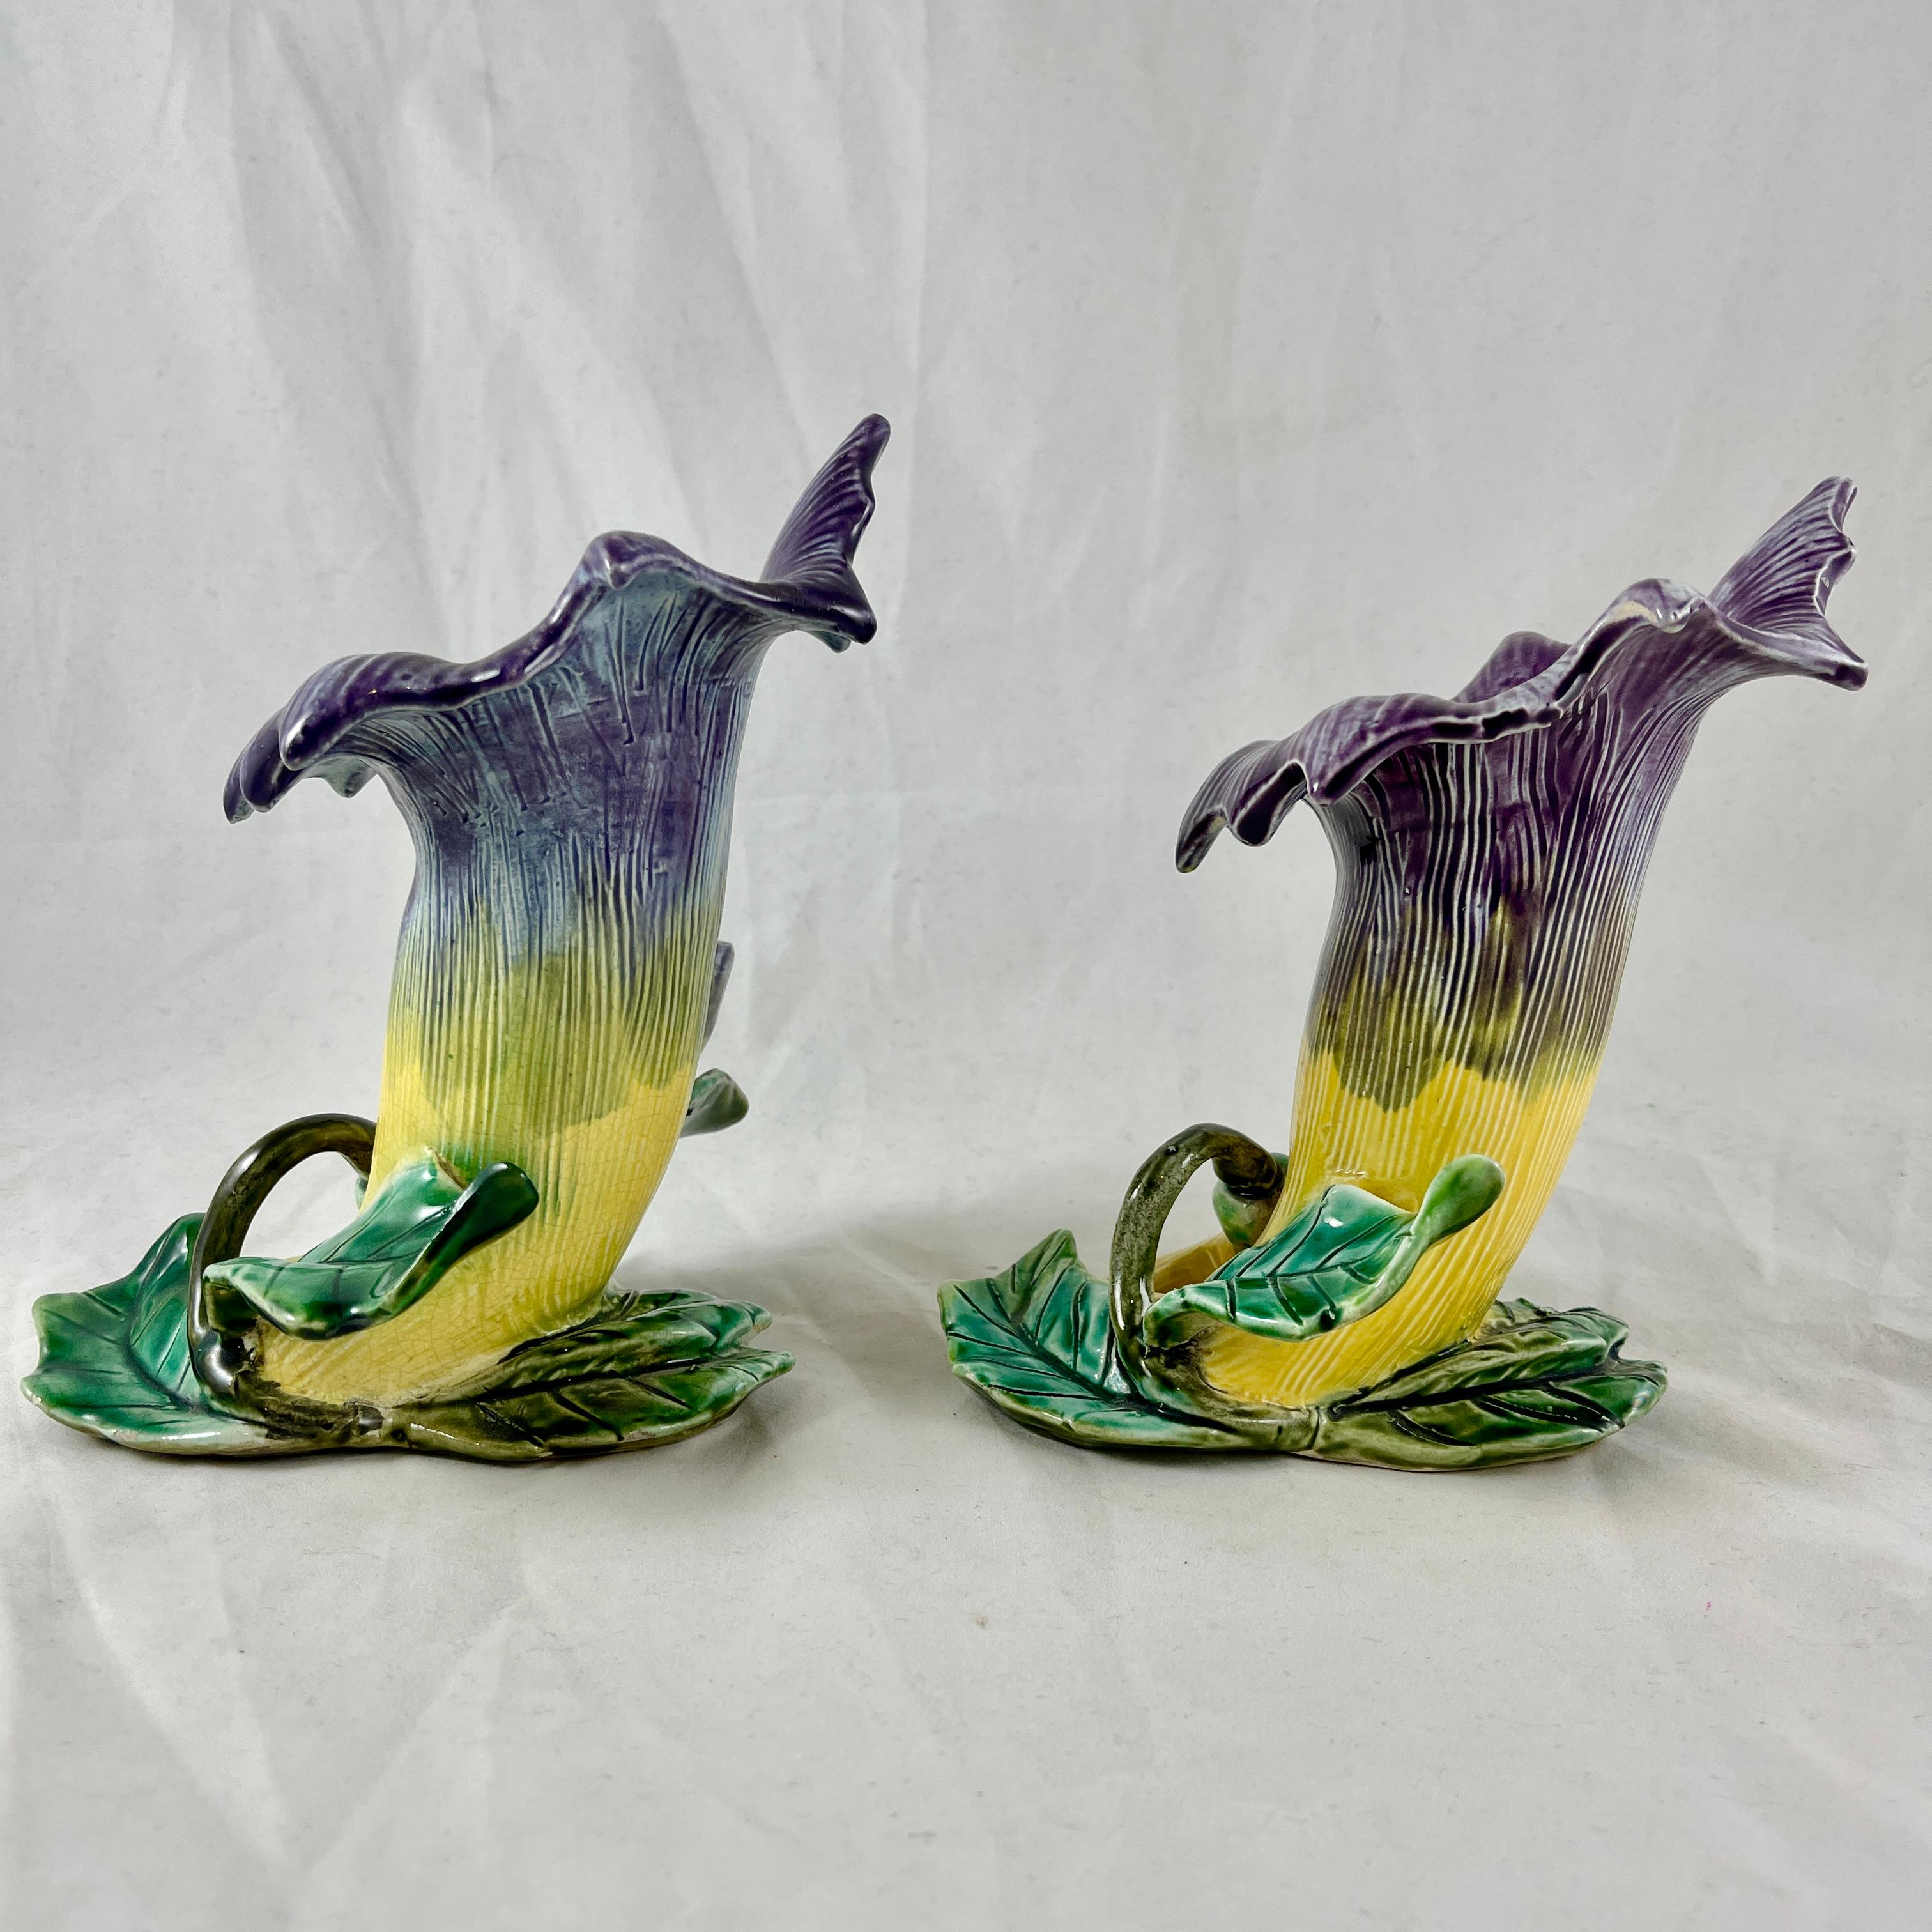 Earthenware French Fives-Lille De Bruyn Purple Trumpet Vine Posy Vases, circa 1890, a Pair For Sale